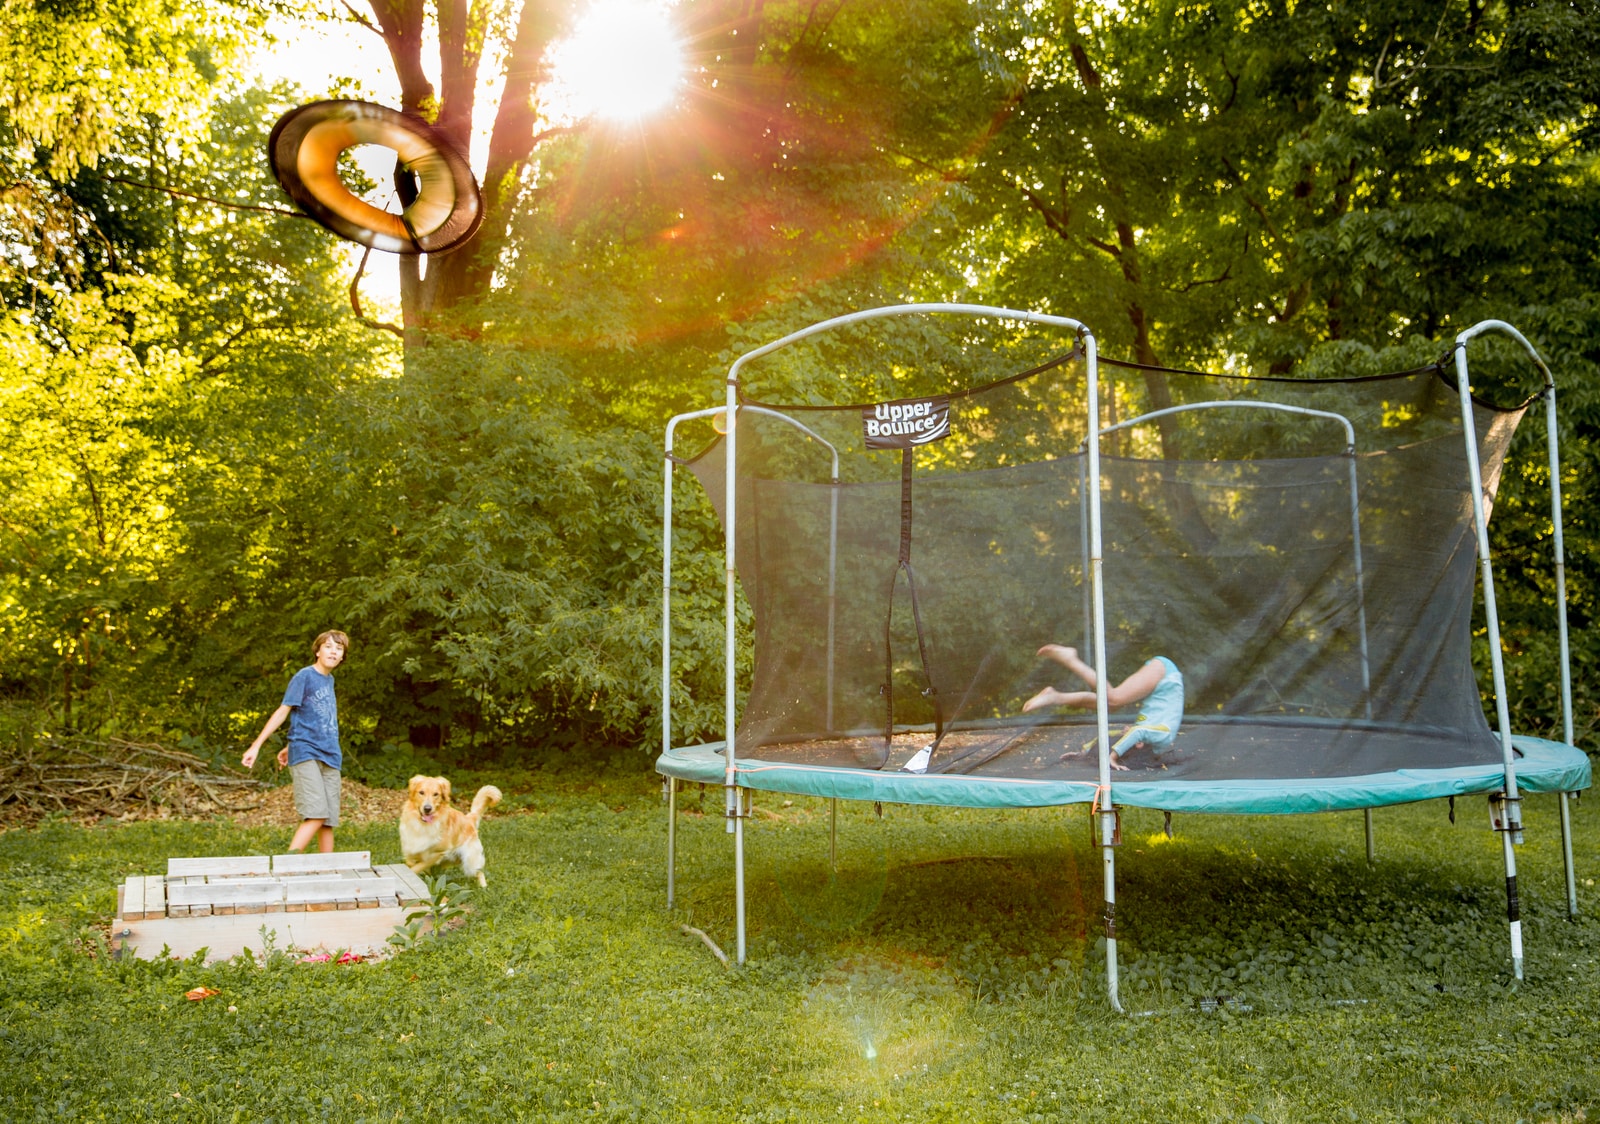 o qq5wue s where to buy a trampoline? 1